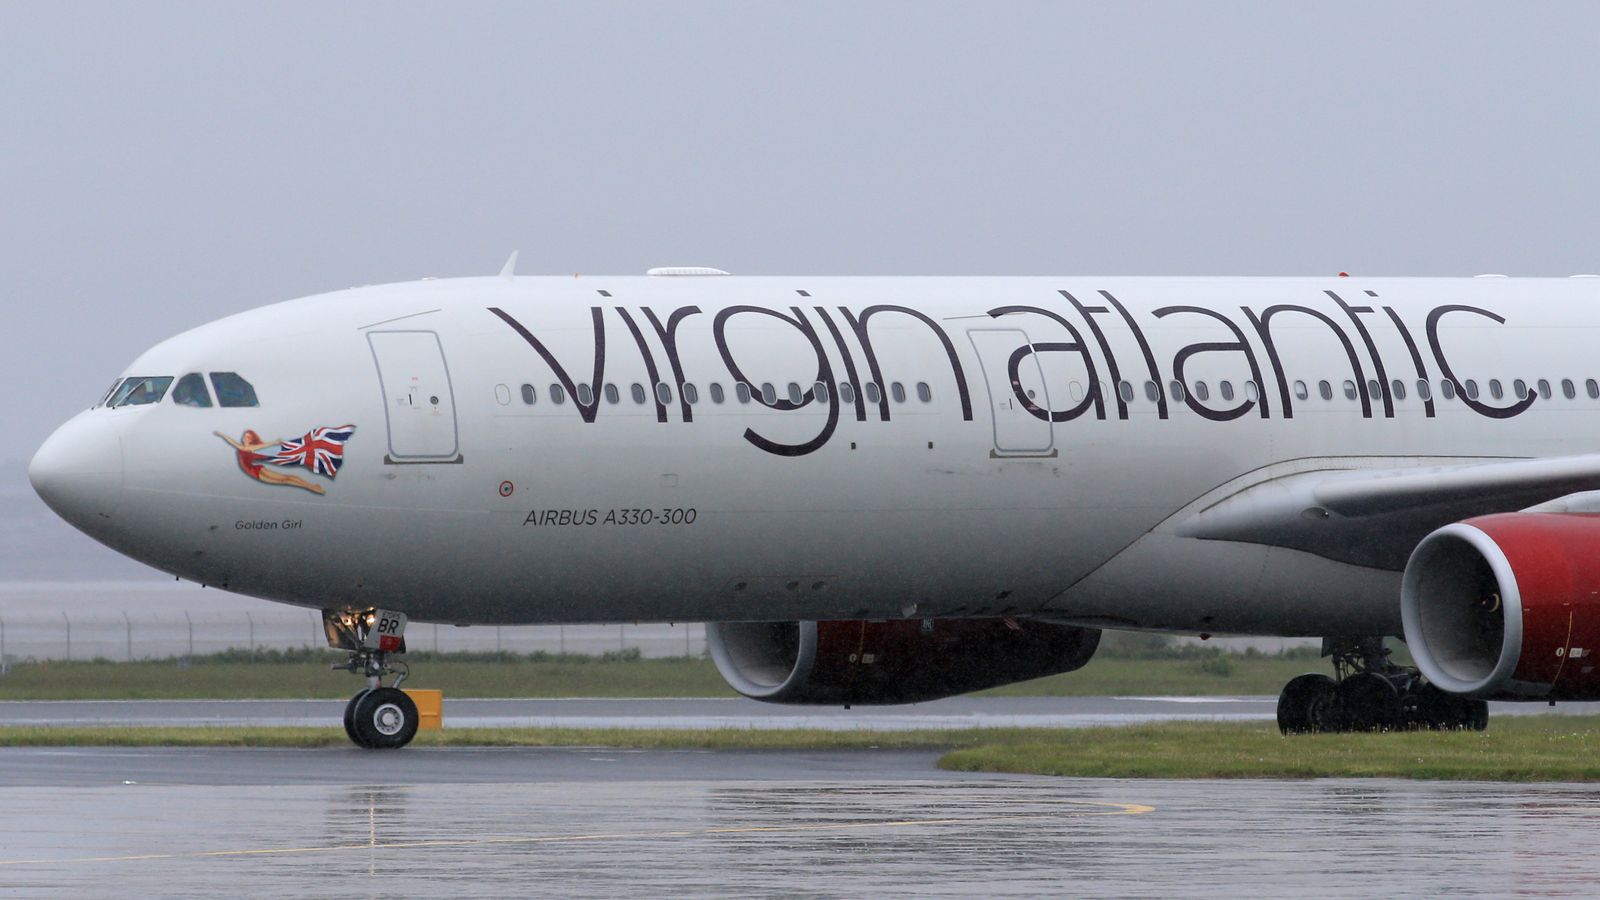 Virgin Atlantic fined 870,000 for 'inadvertent' flights over Iraq airspace, flouting US-imposed ban